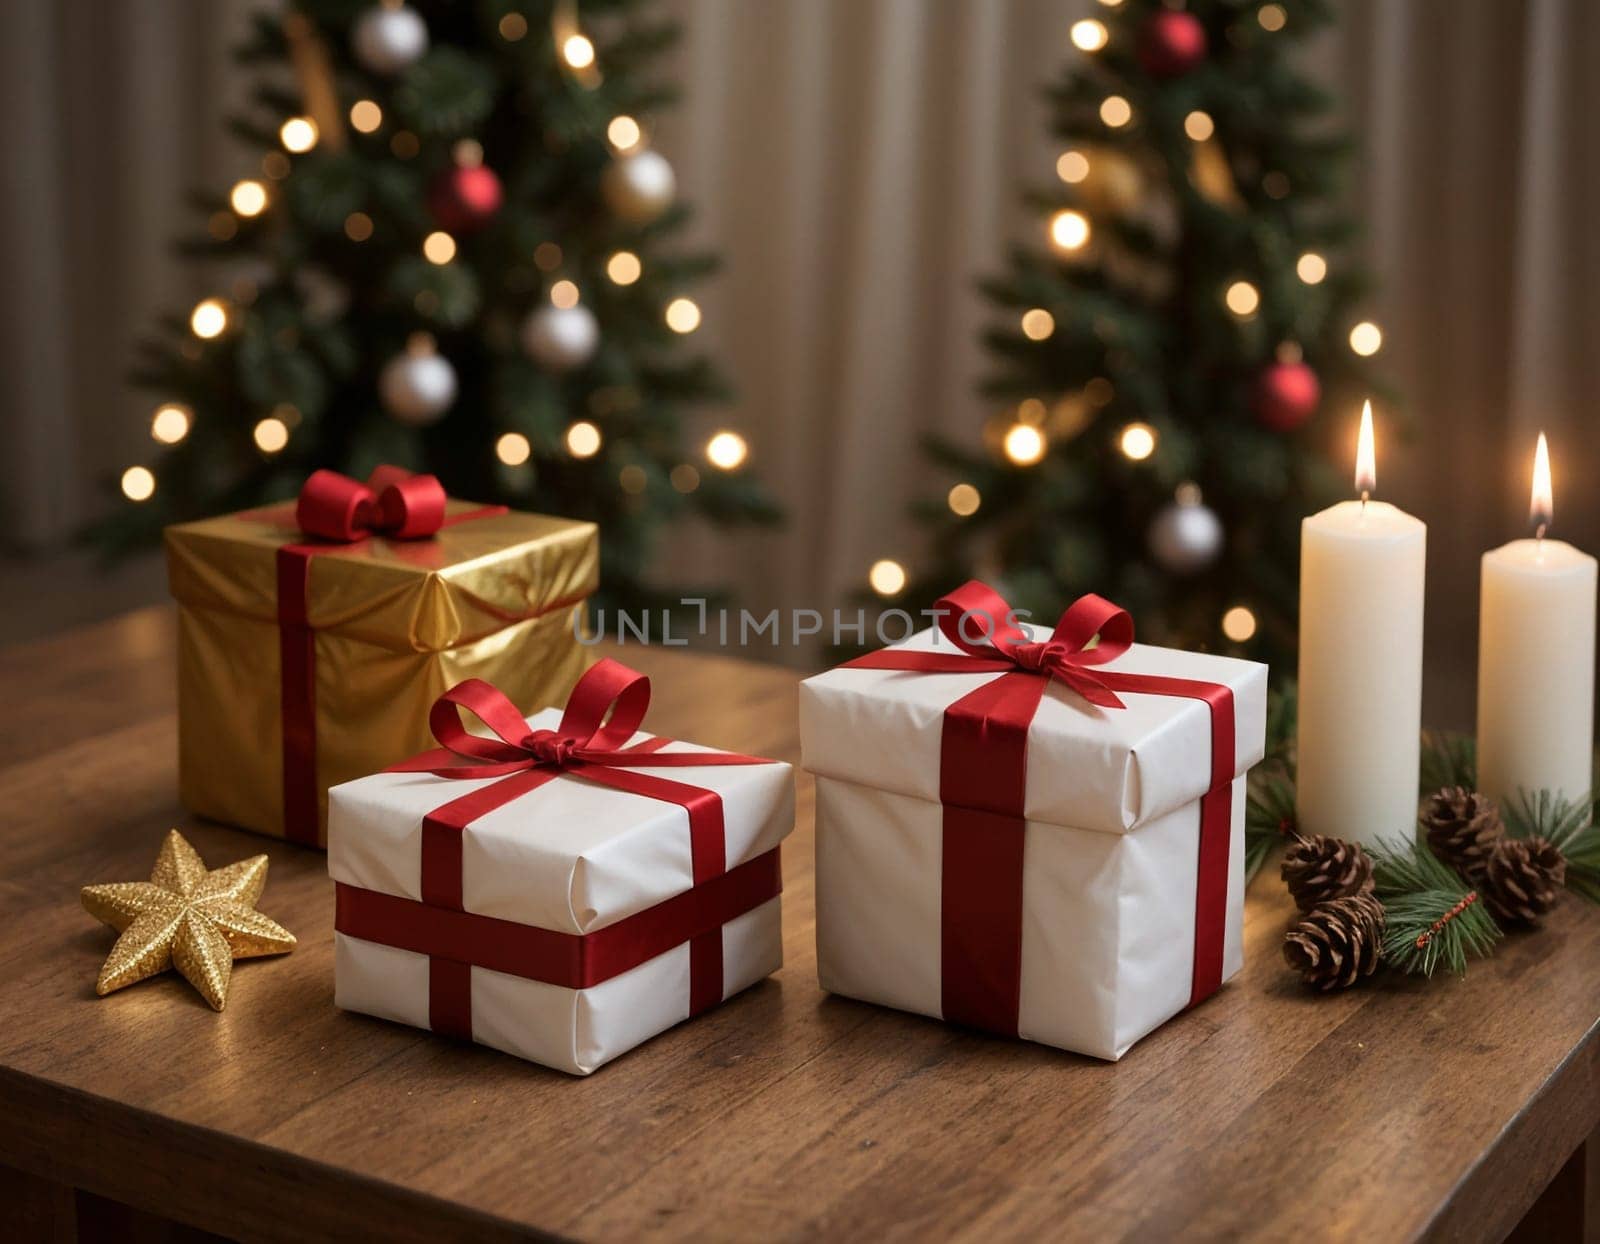 Lovely Christmas background with gifts, decorations and candles on the table